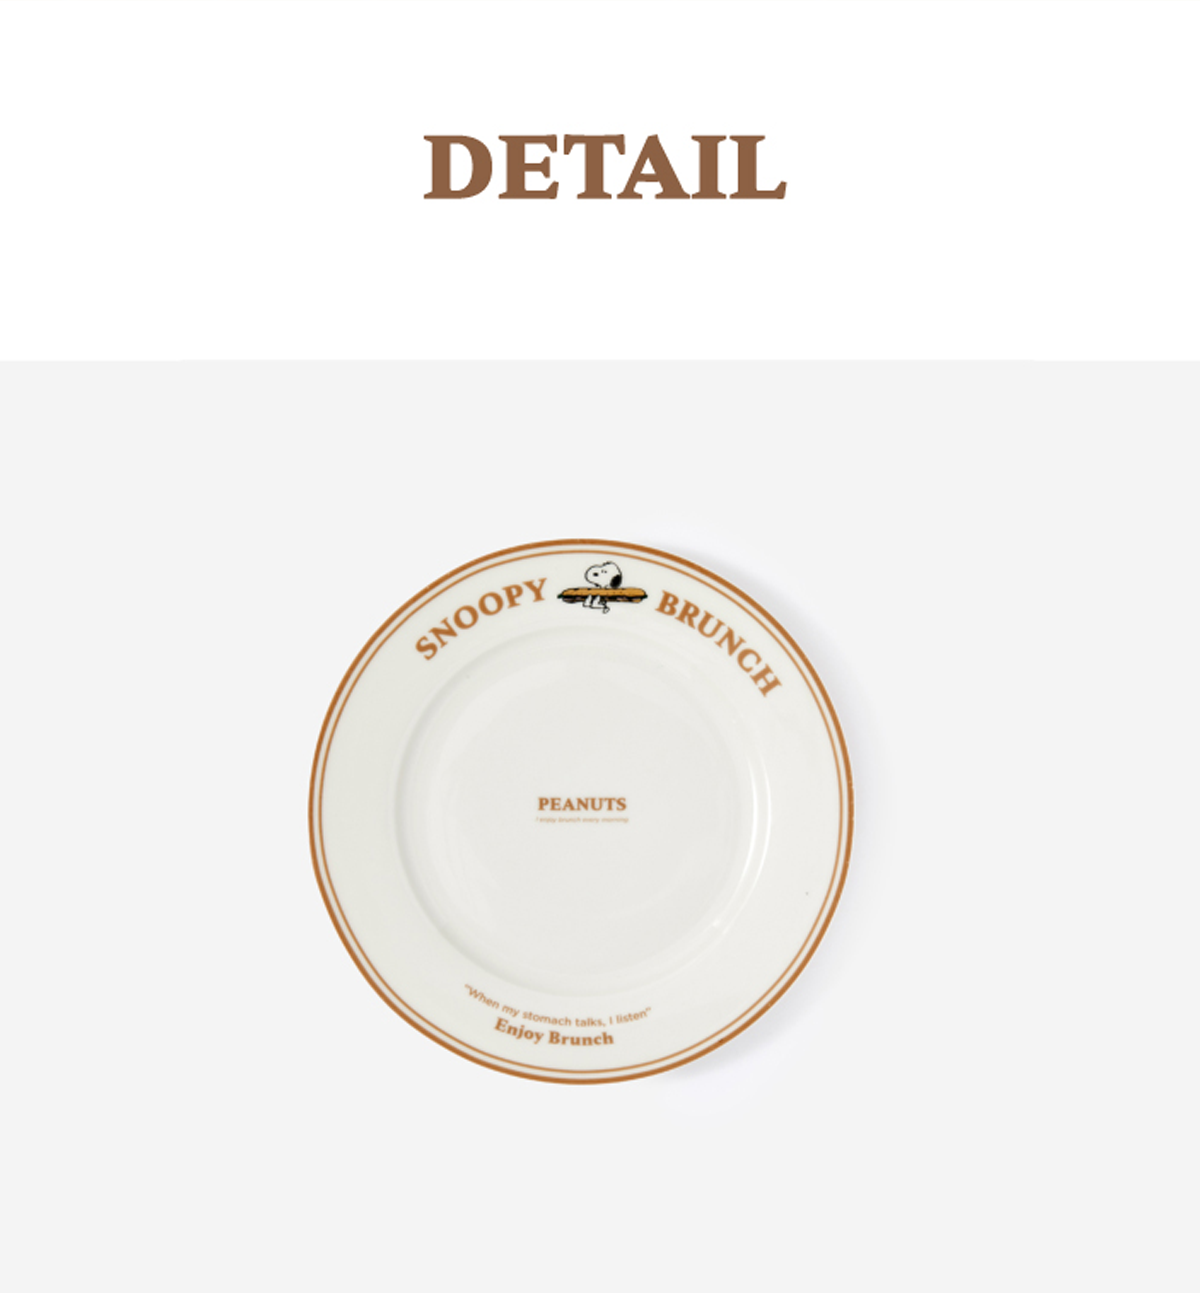 Peanuts Snoopy Round Plate [Brown Line]